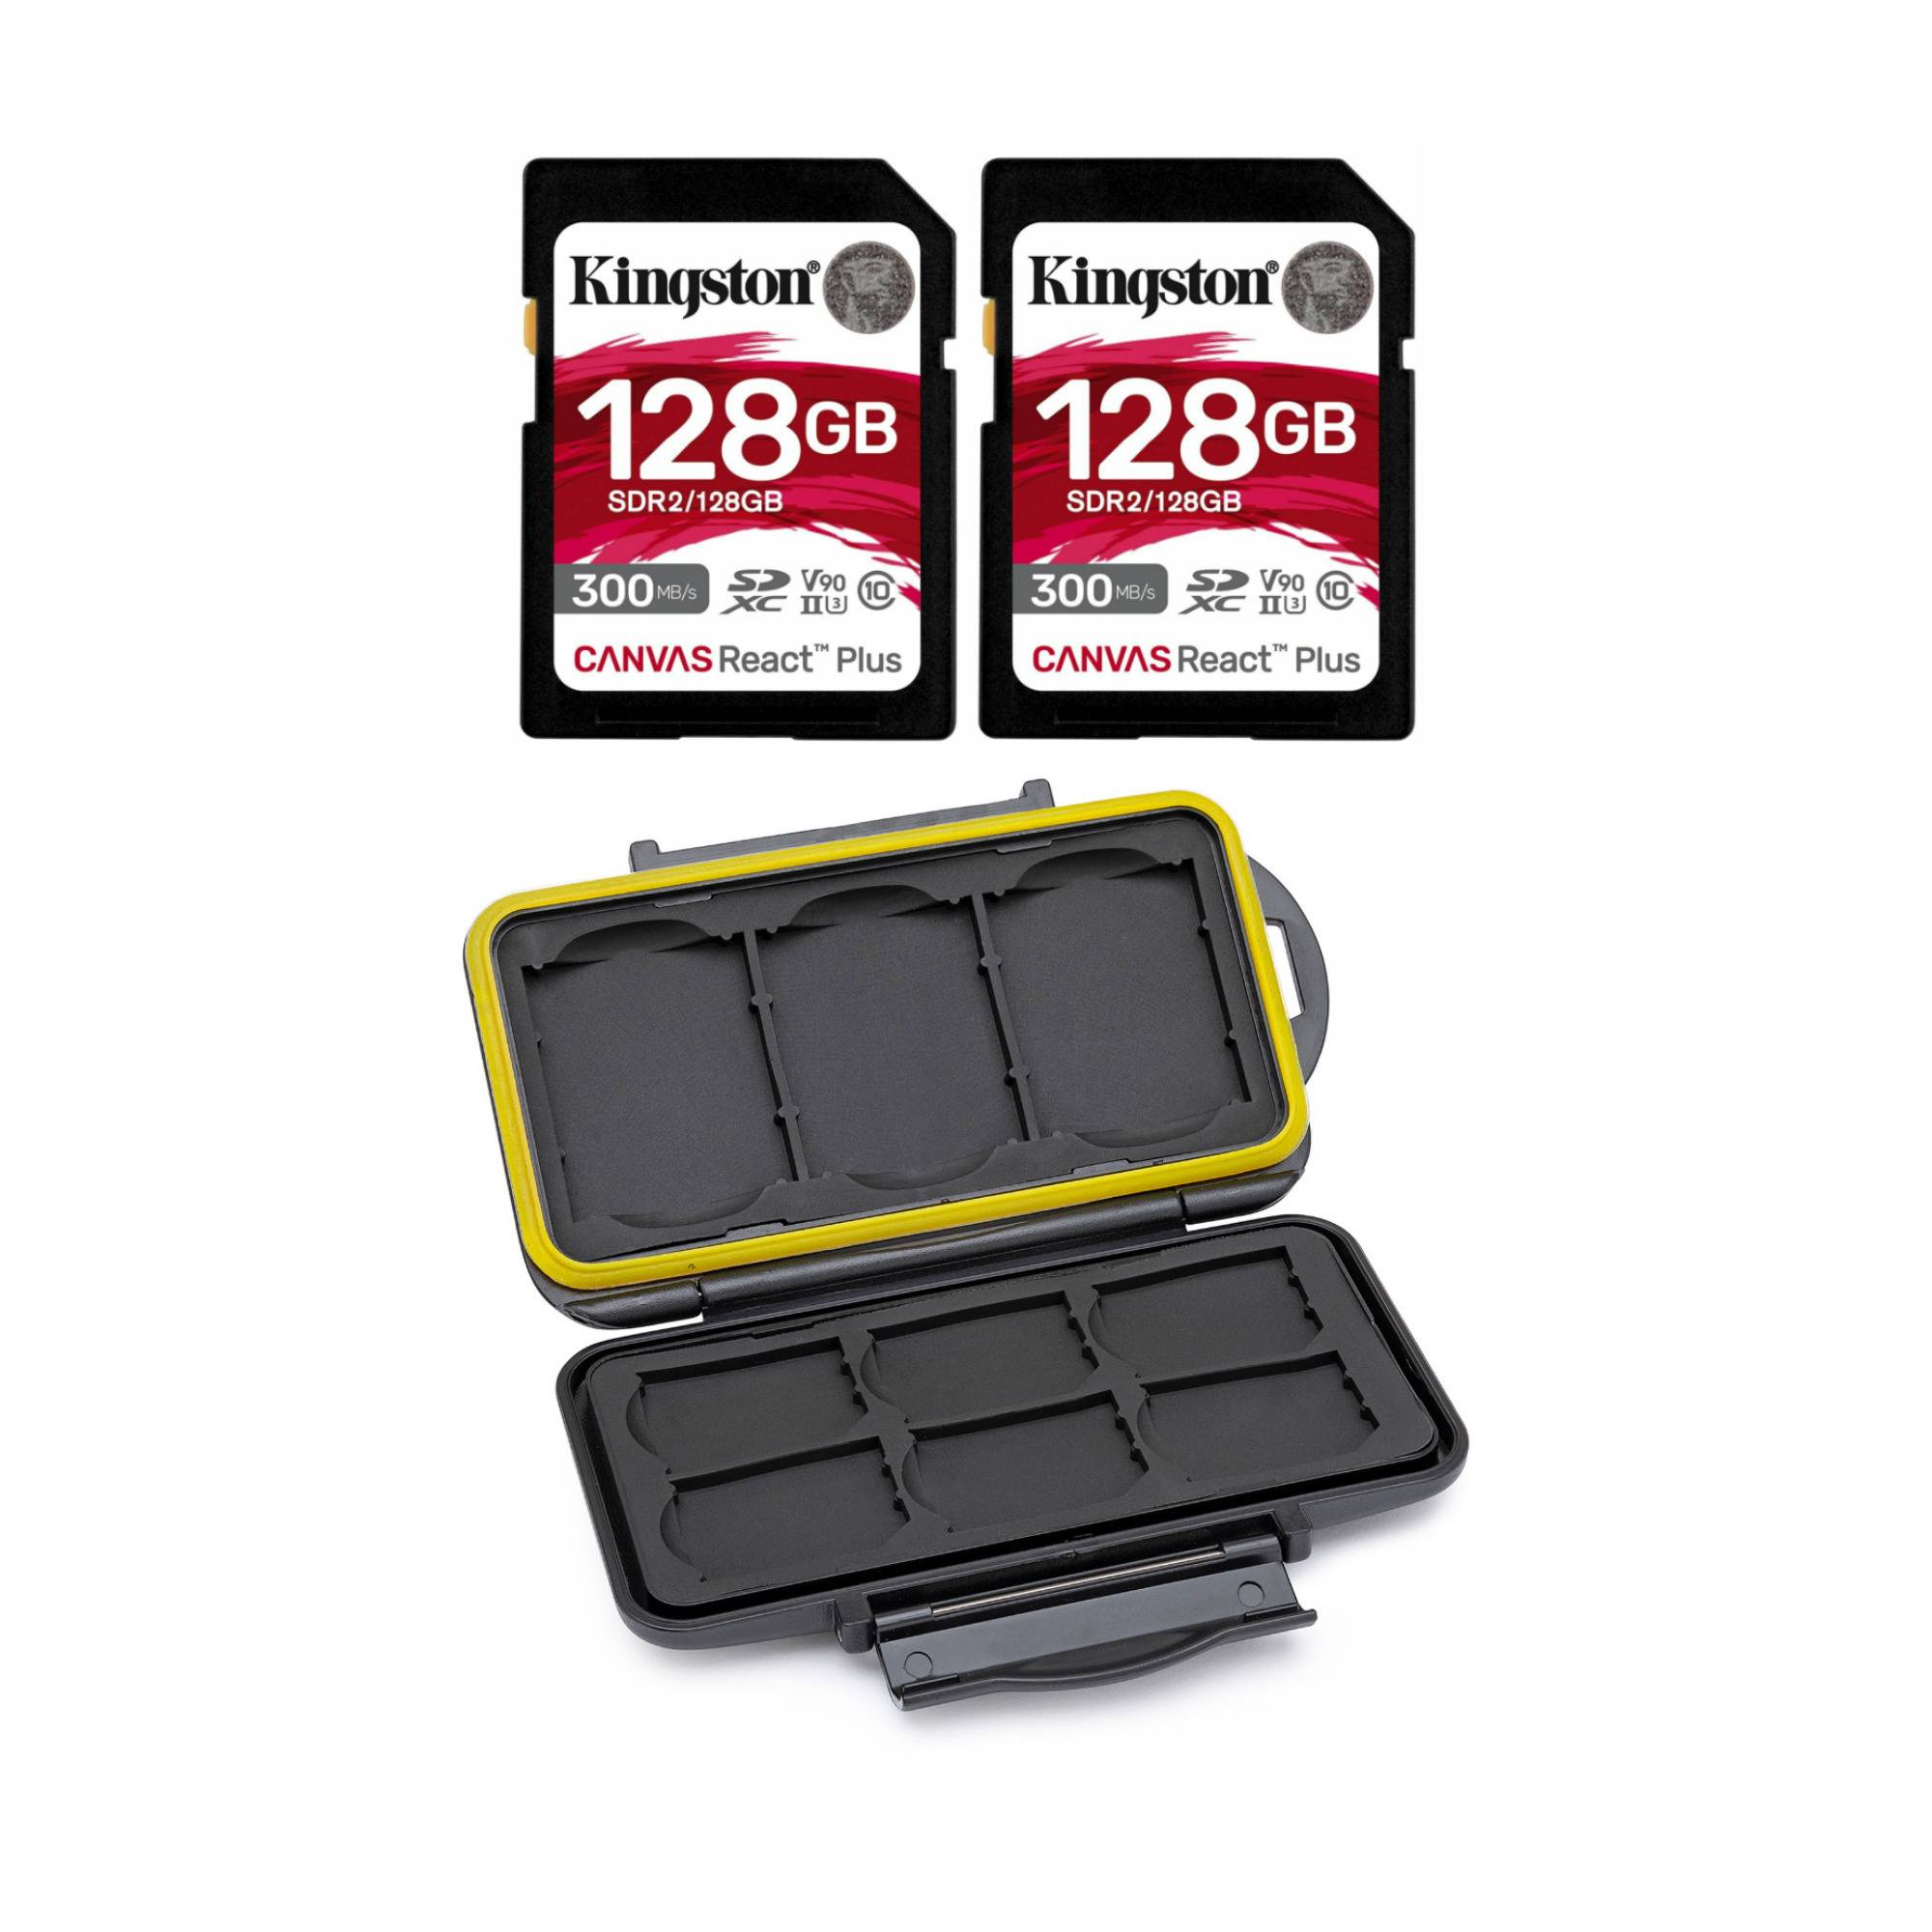 Kingston Canvas React Plus 128GB V90 SDXC UHS-II SD Card (2-Pack) and Memory Storage Carrying Case